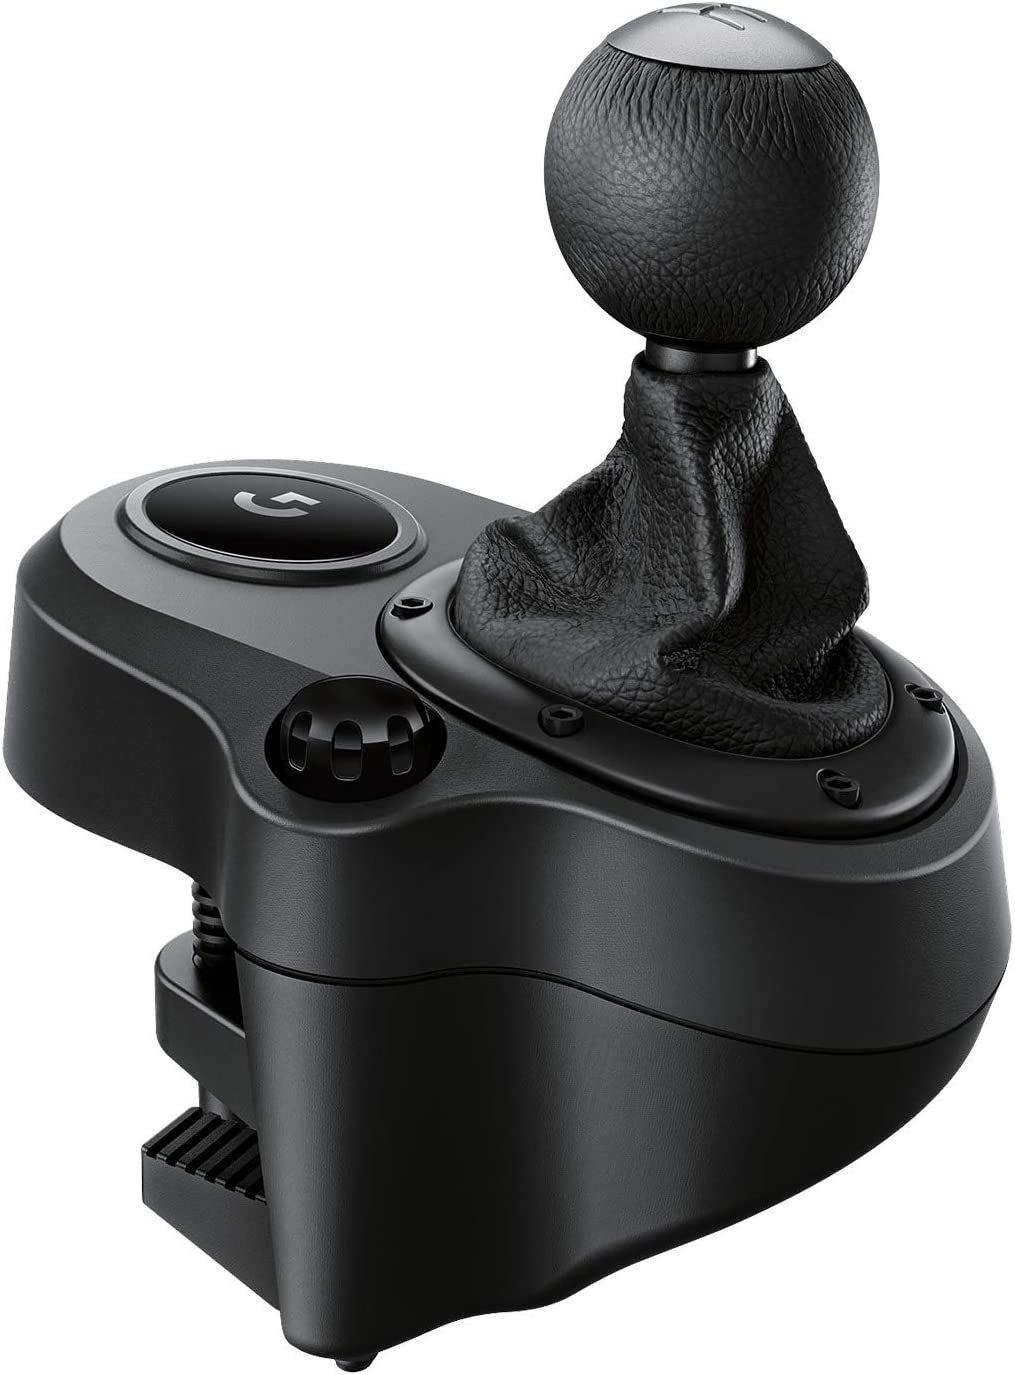 Logitech Driving Shifter for G923, and G920 Racing Wheels |